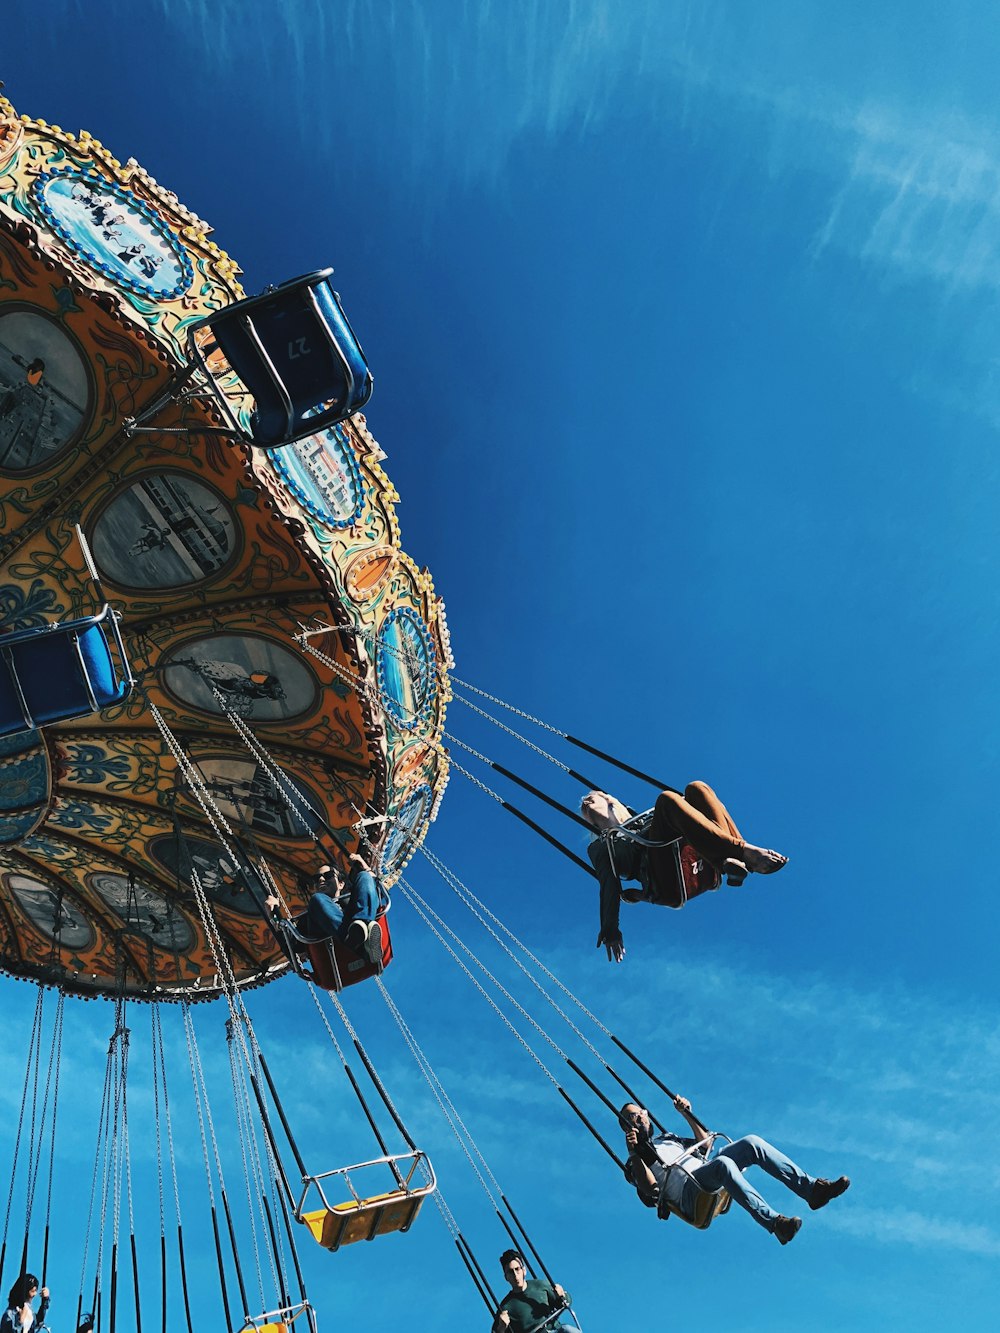 a group of people riding on top of a carnival ride